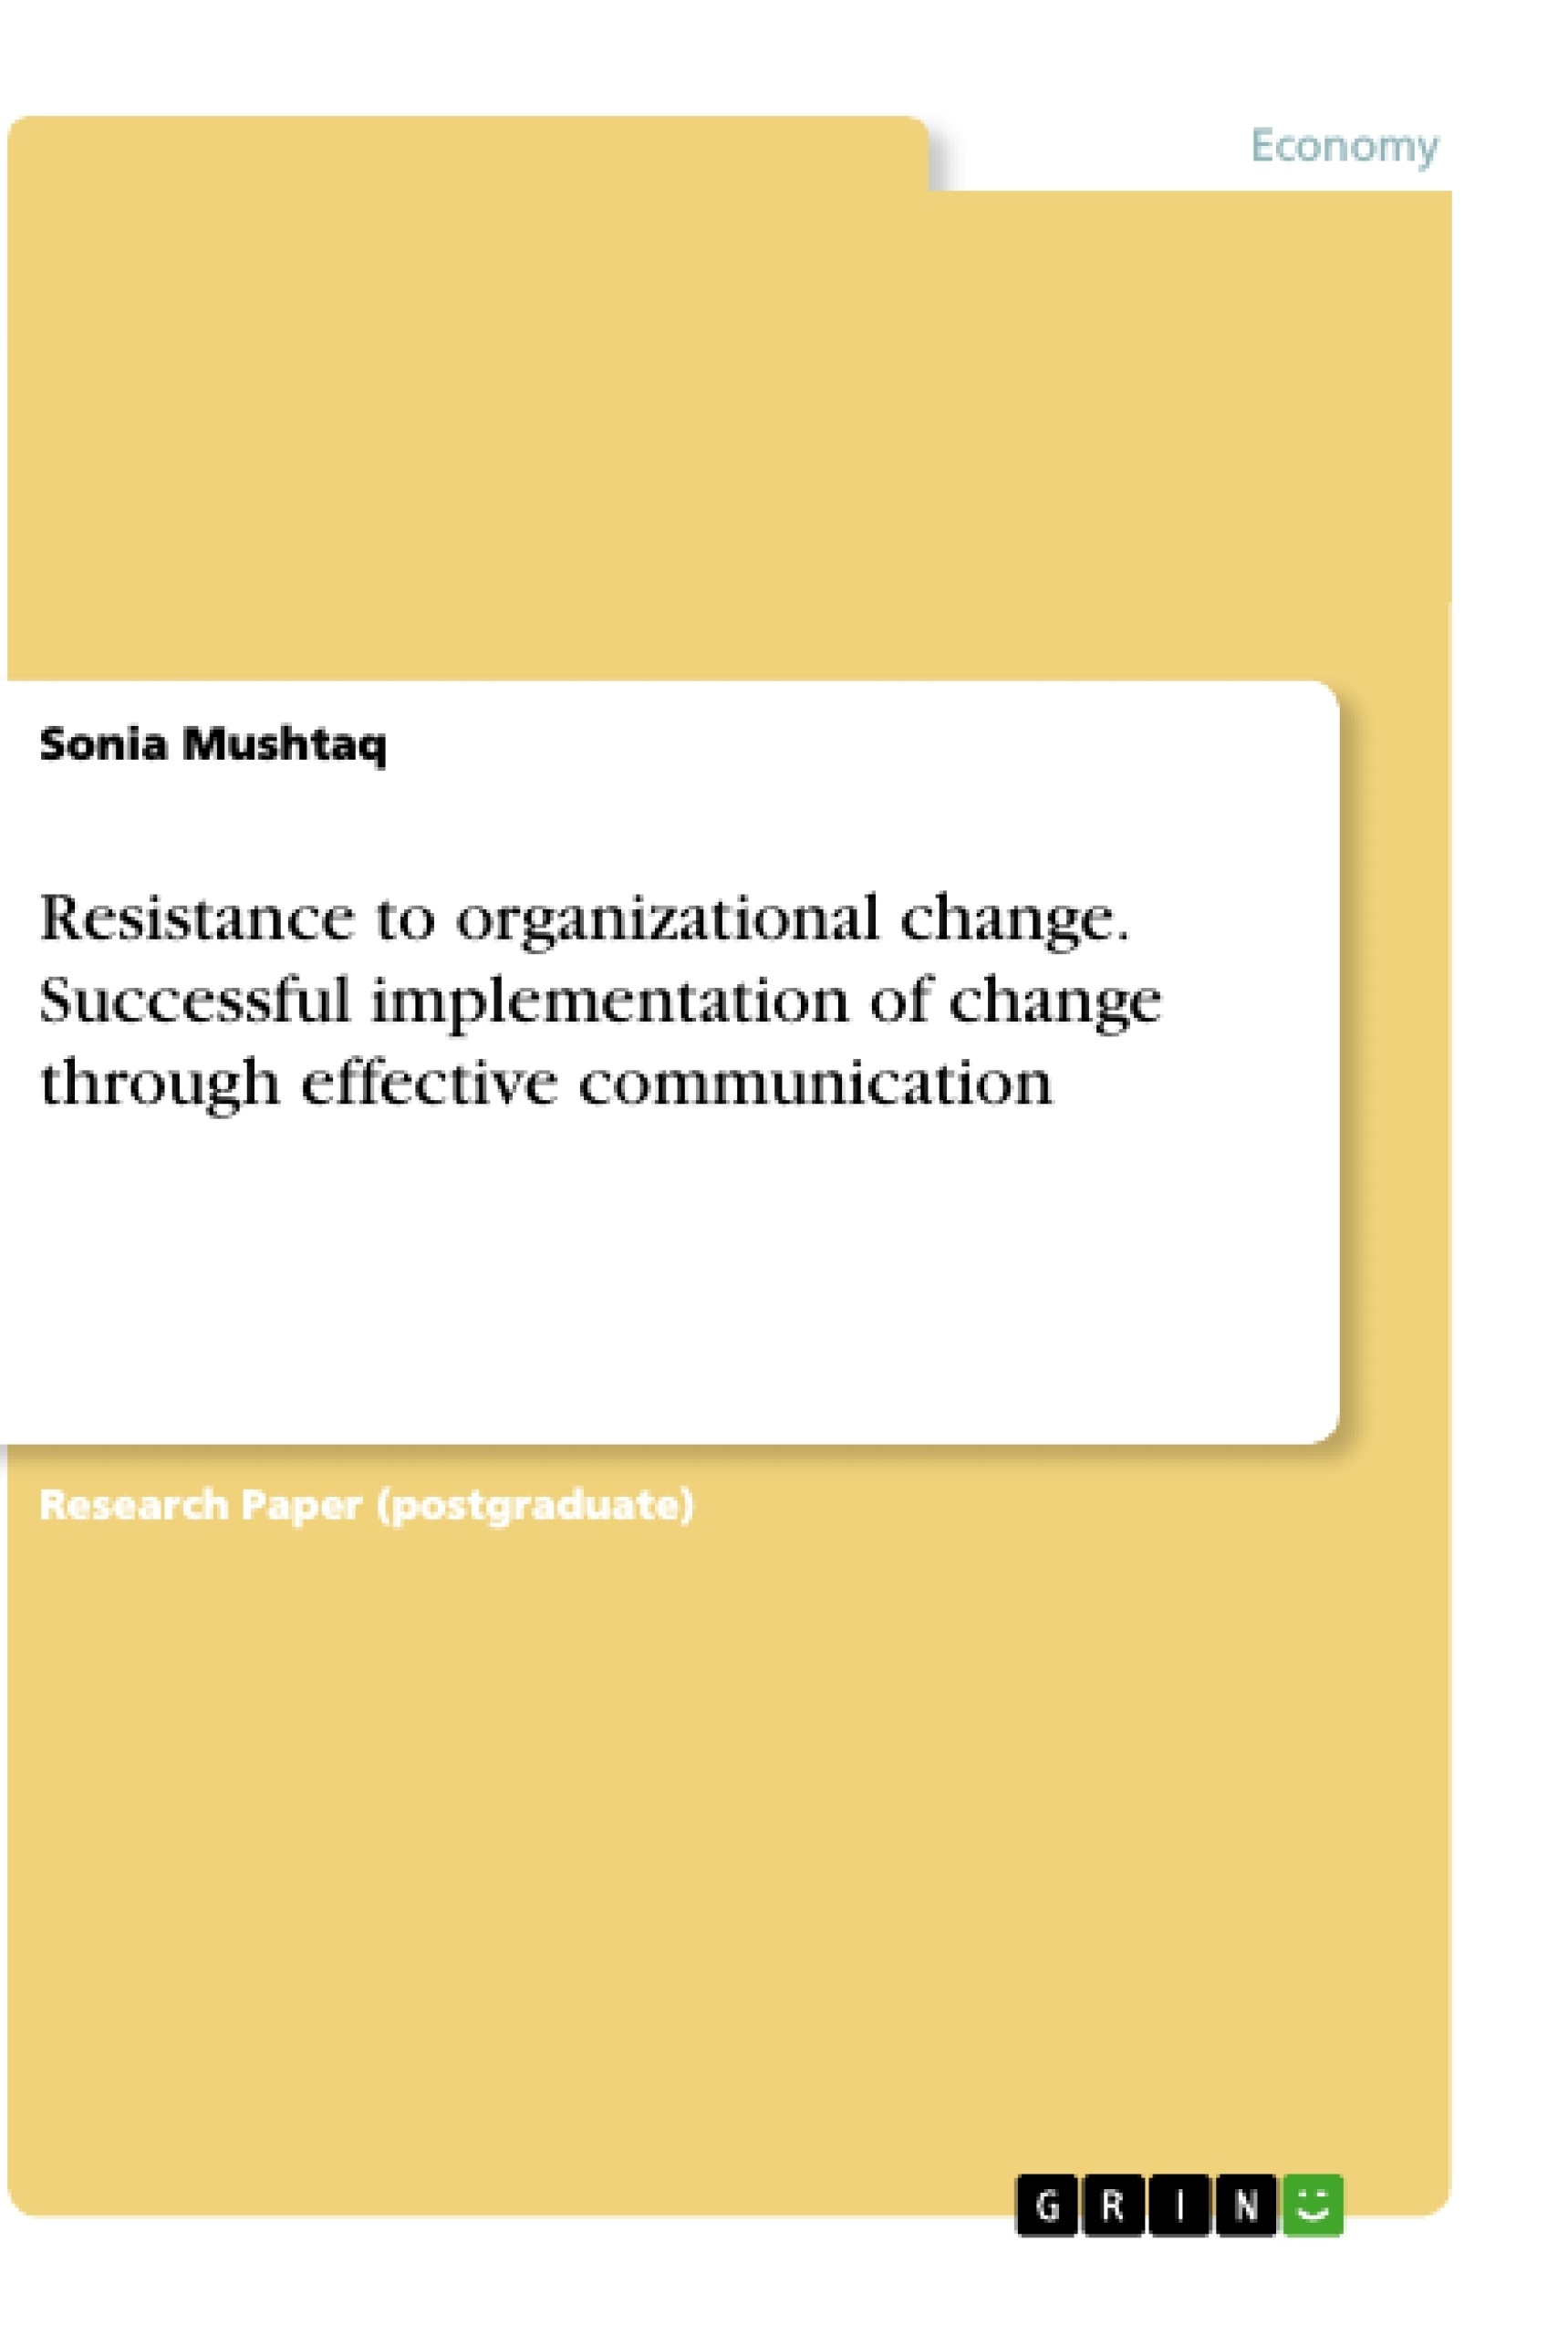 Titel: Resistance to organizational change. Successful implementation of change through effective communication